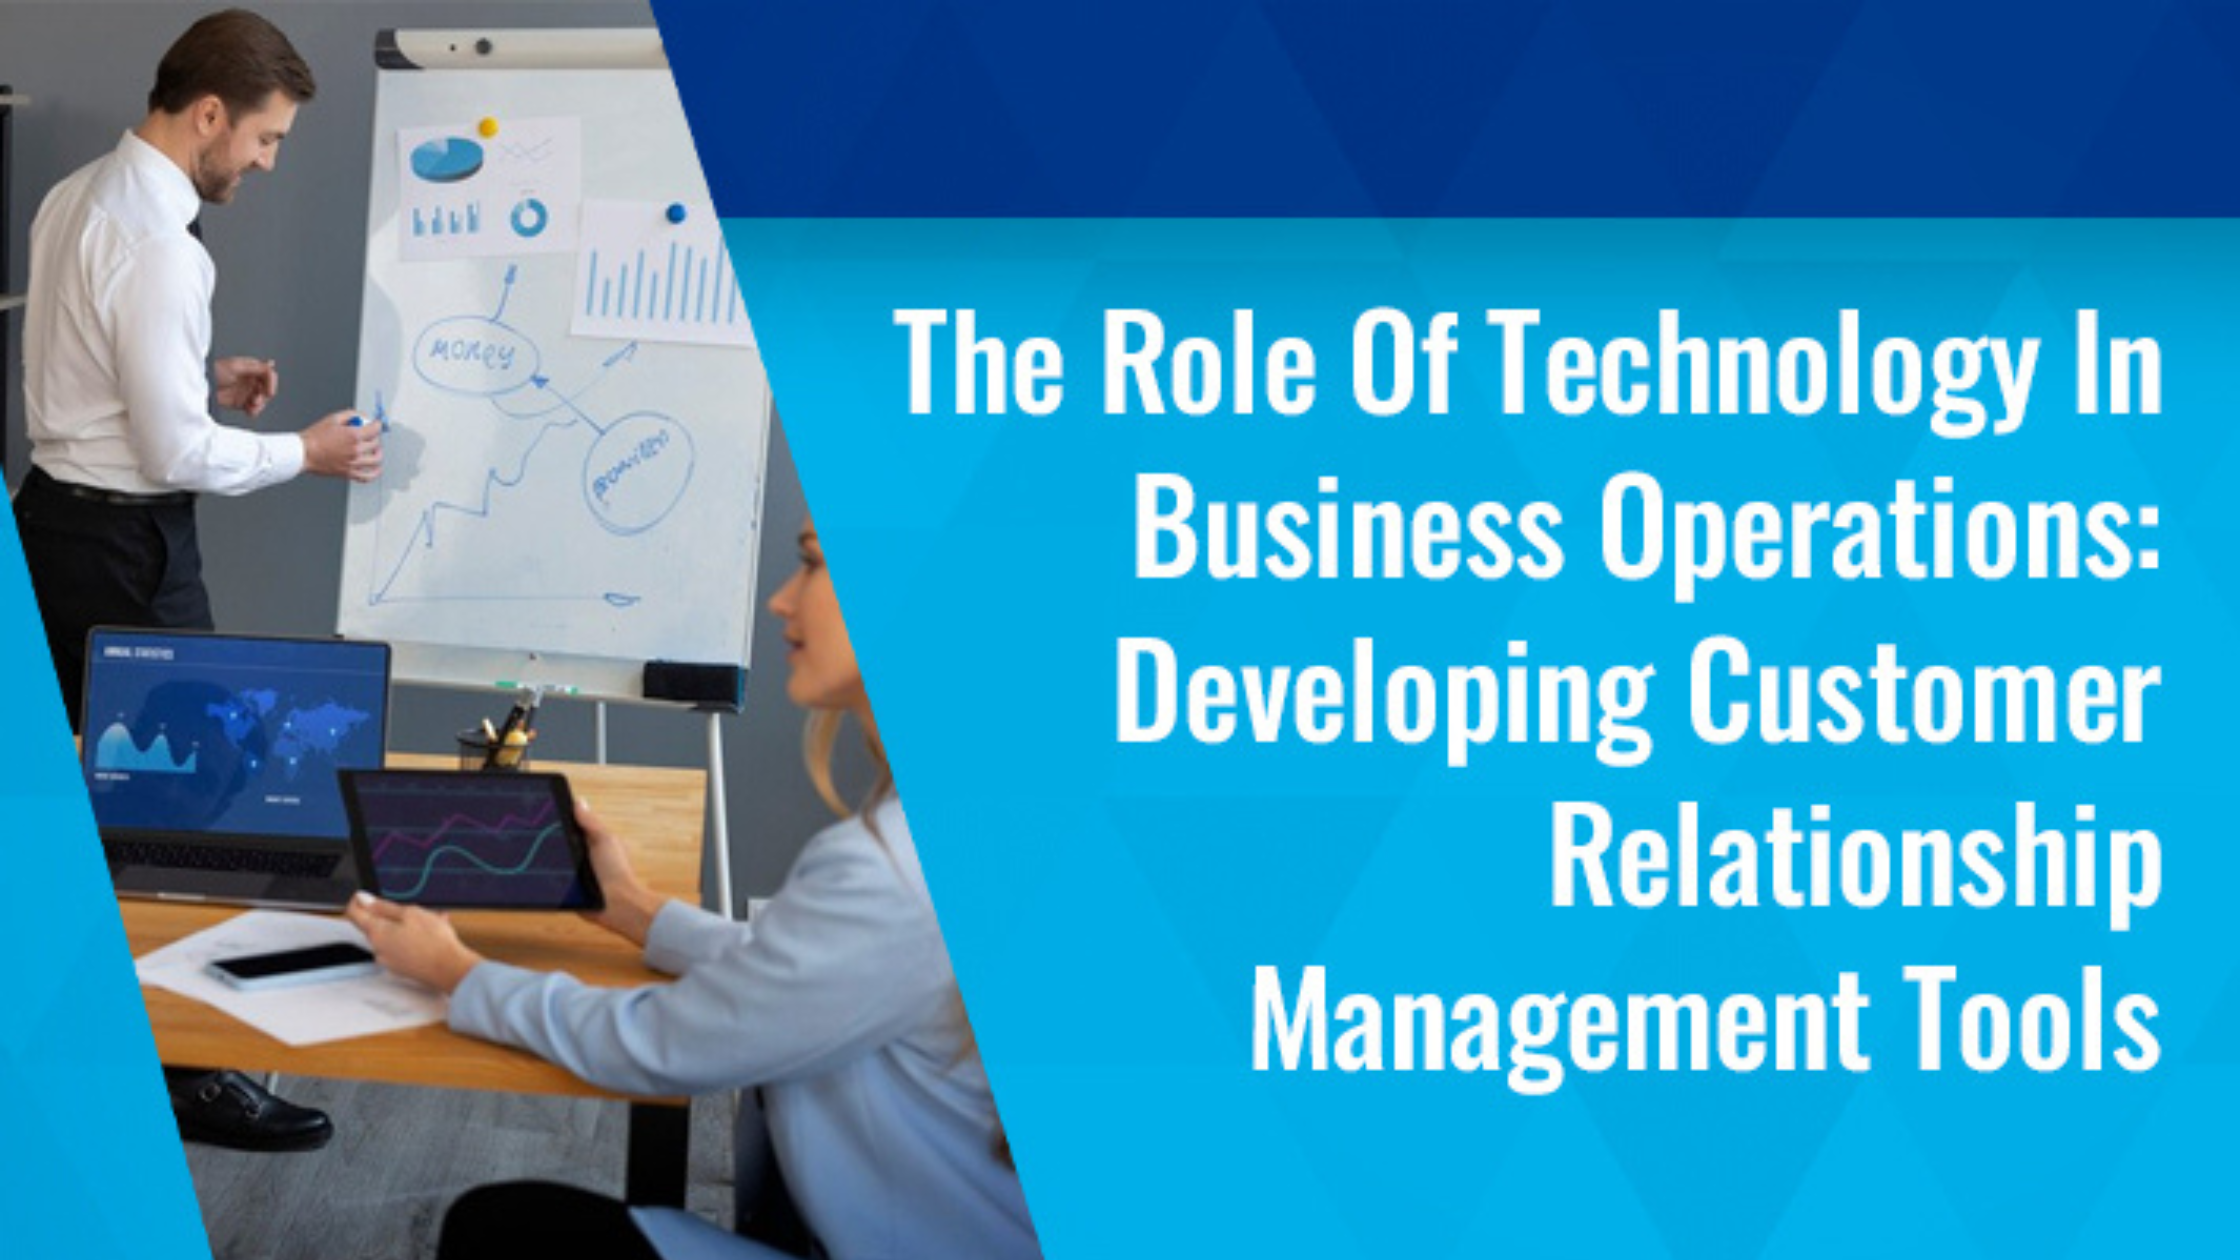 The Role Of Technology In Business Operations: Developing Customer Relationship Management Tools